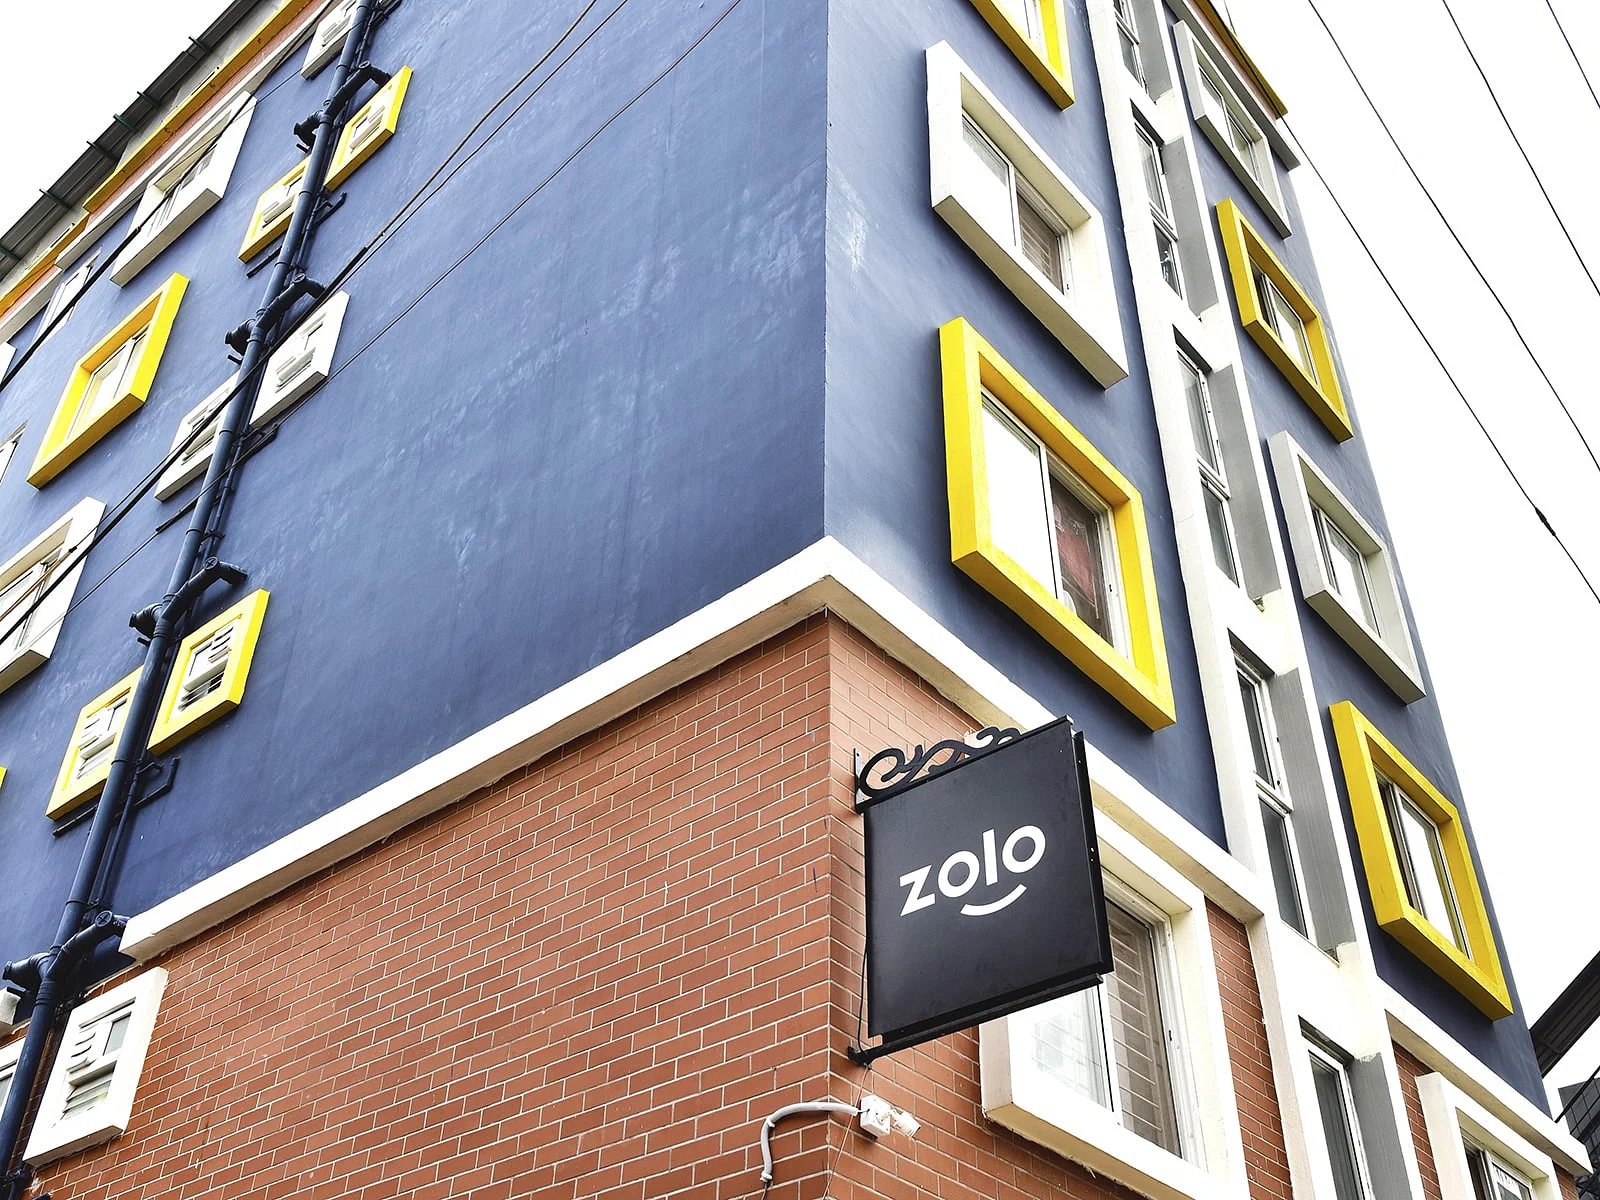 safe and affordable hostels for men and women students with 24/7 security and CCTV surveillance-Zolo Mac